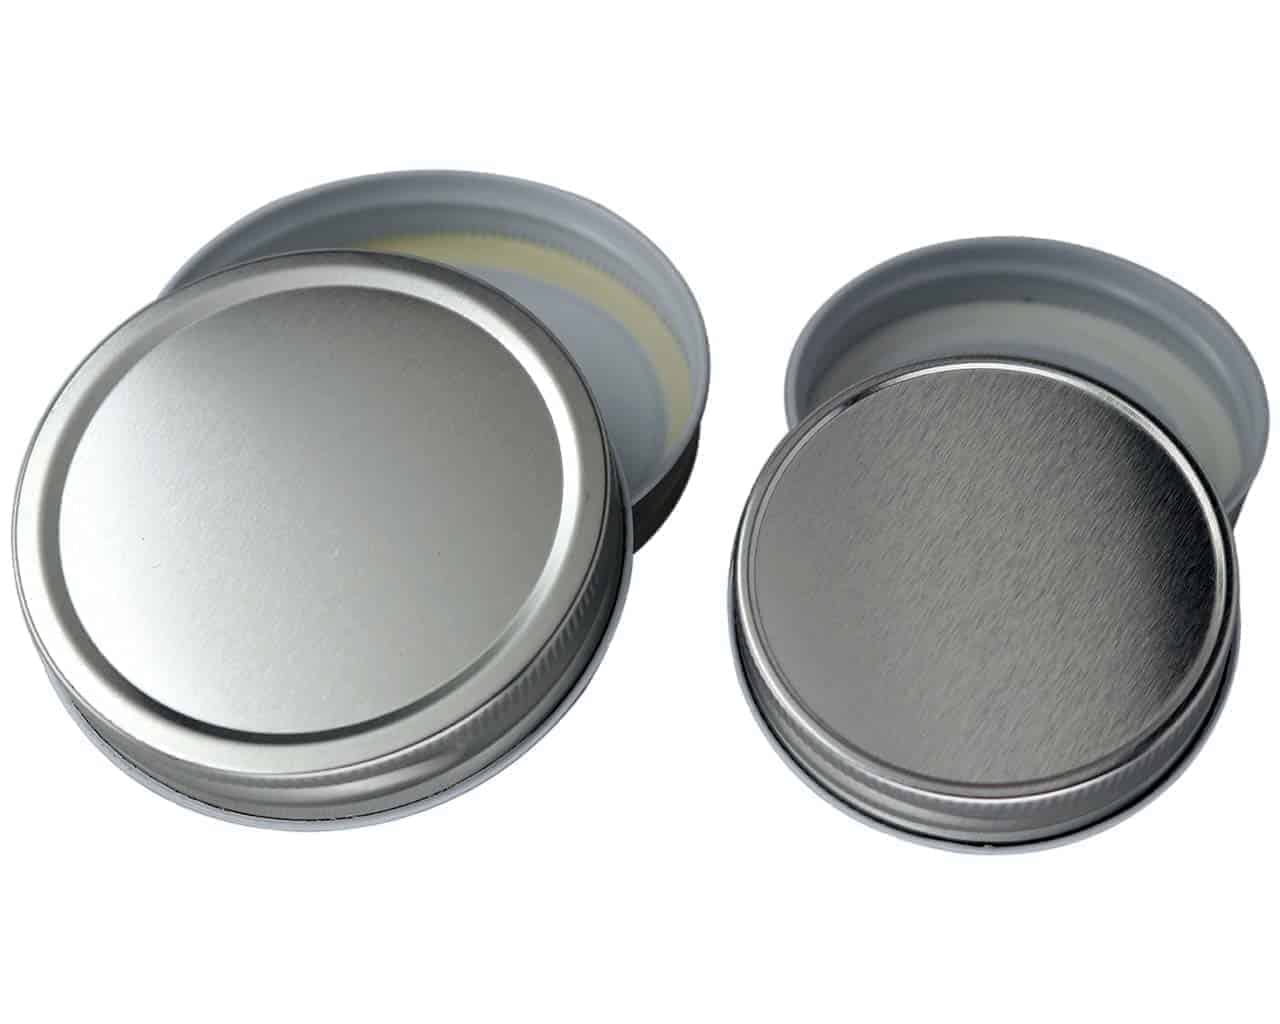 Shiny silver storage lids with plastisol seals for regular and wide mouth Mason jars